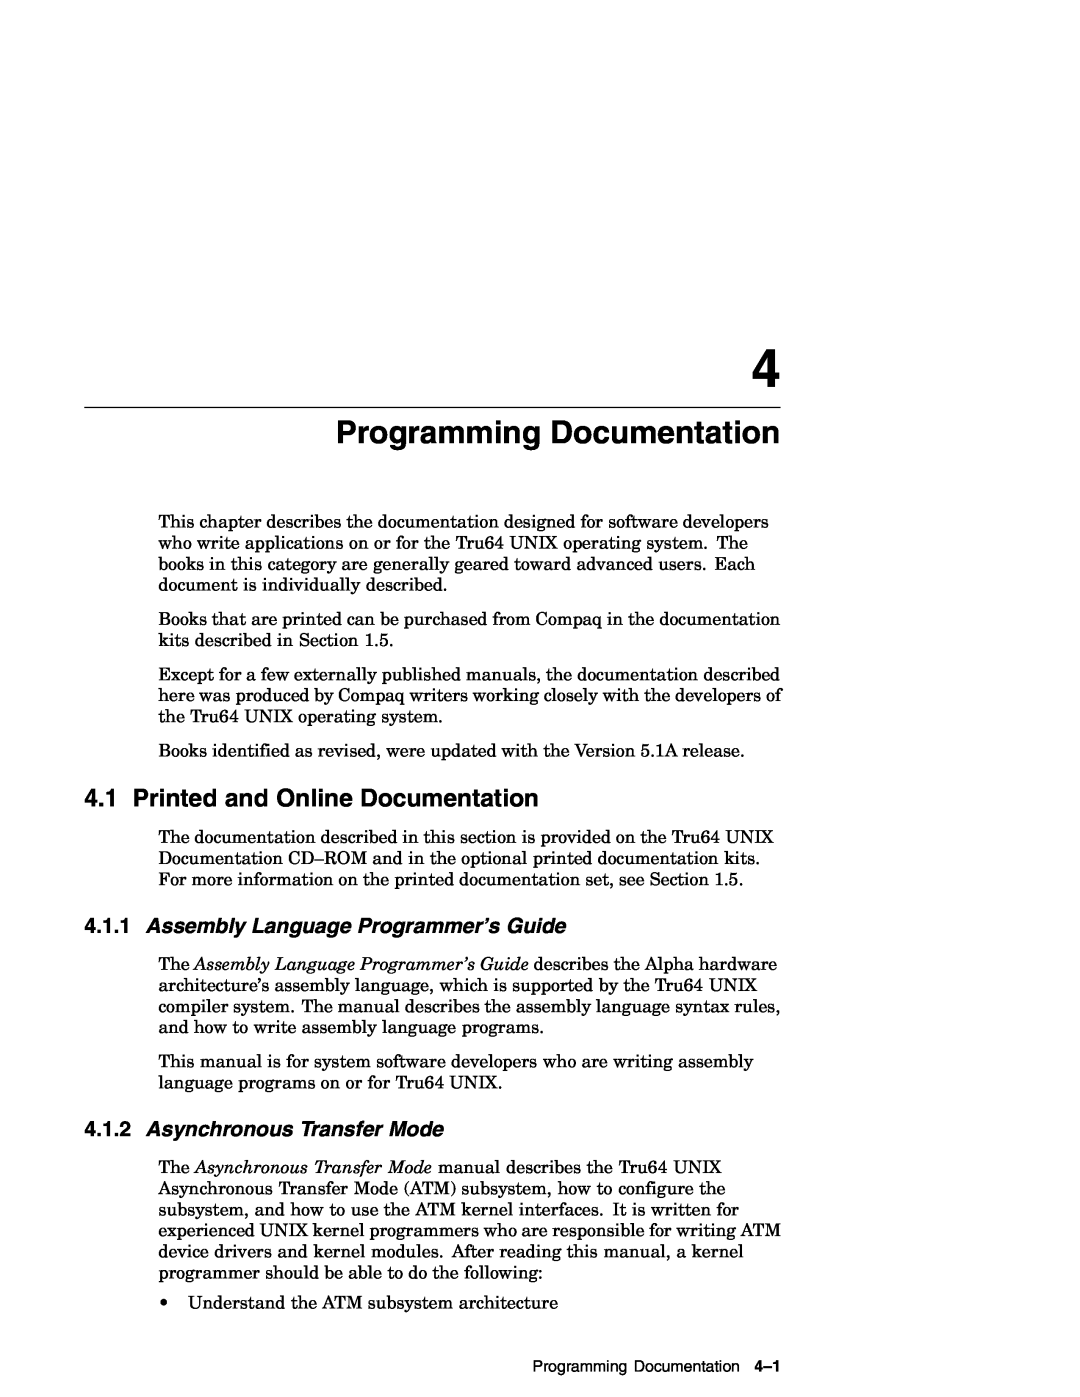 Compaq AA-RH8RD-TE manual Programming Documentation, Printed and Online Documentation, Assembly Language Programmer’s Guide 